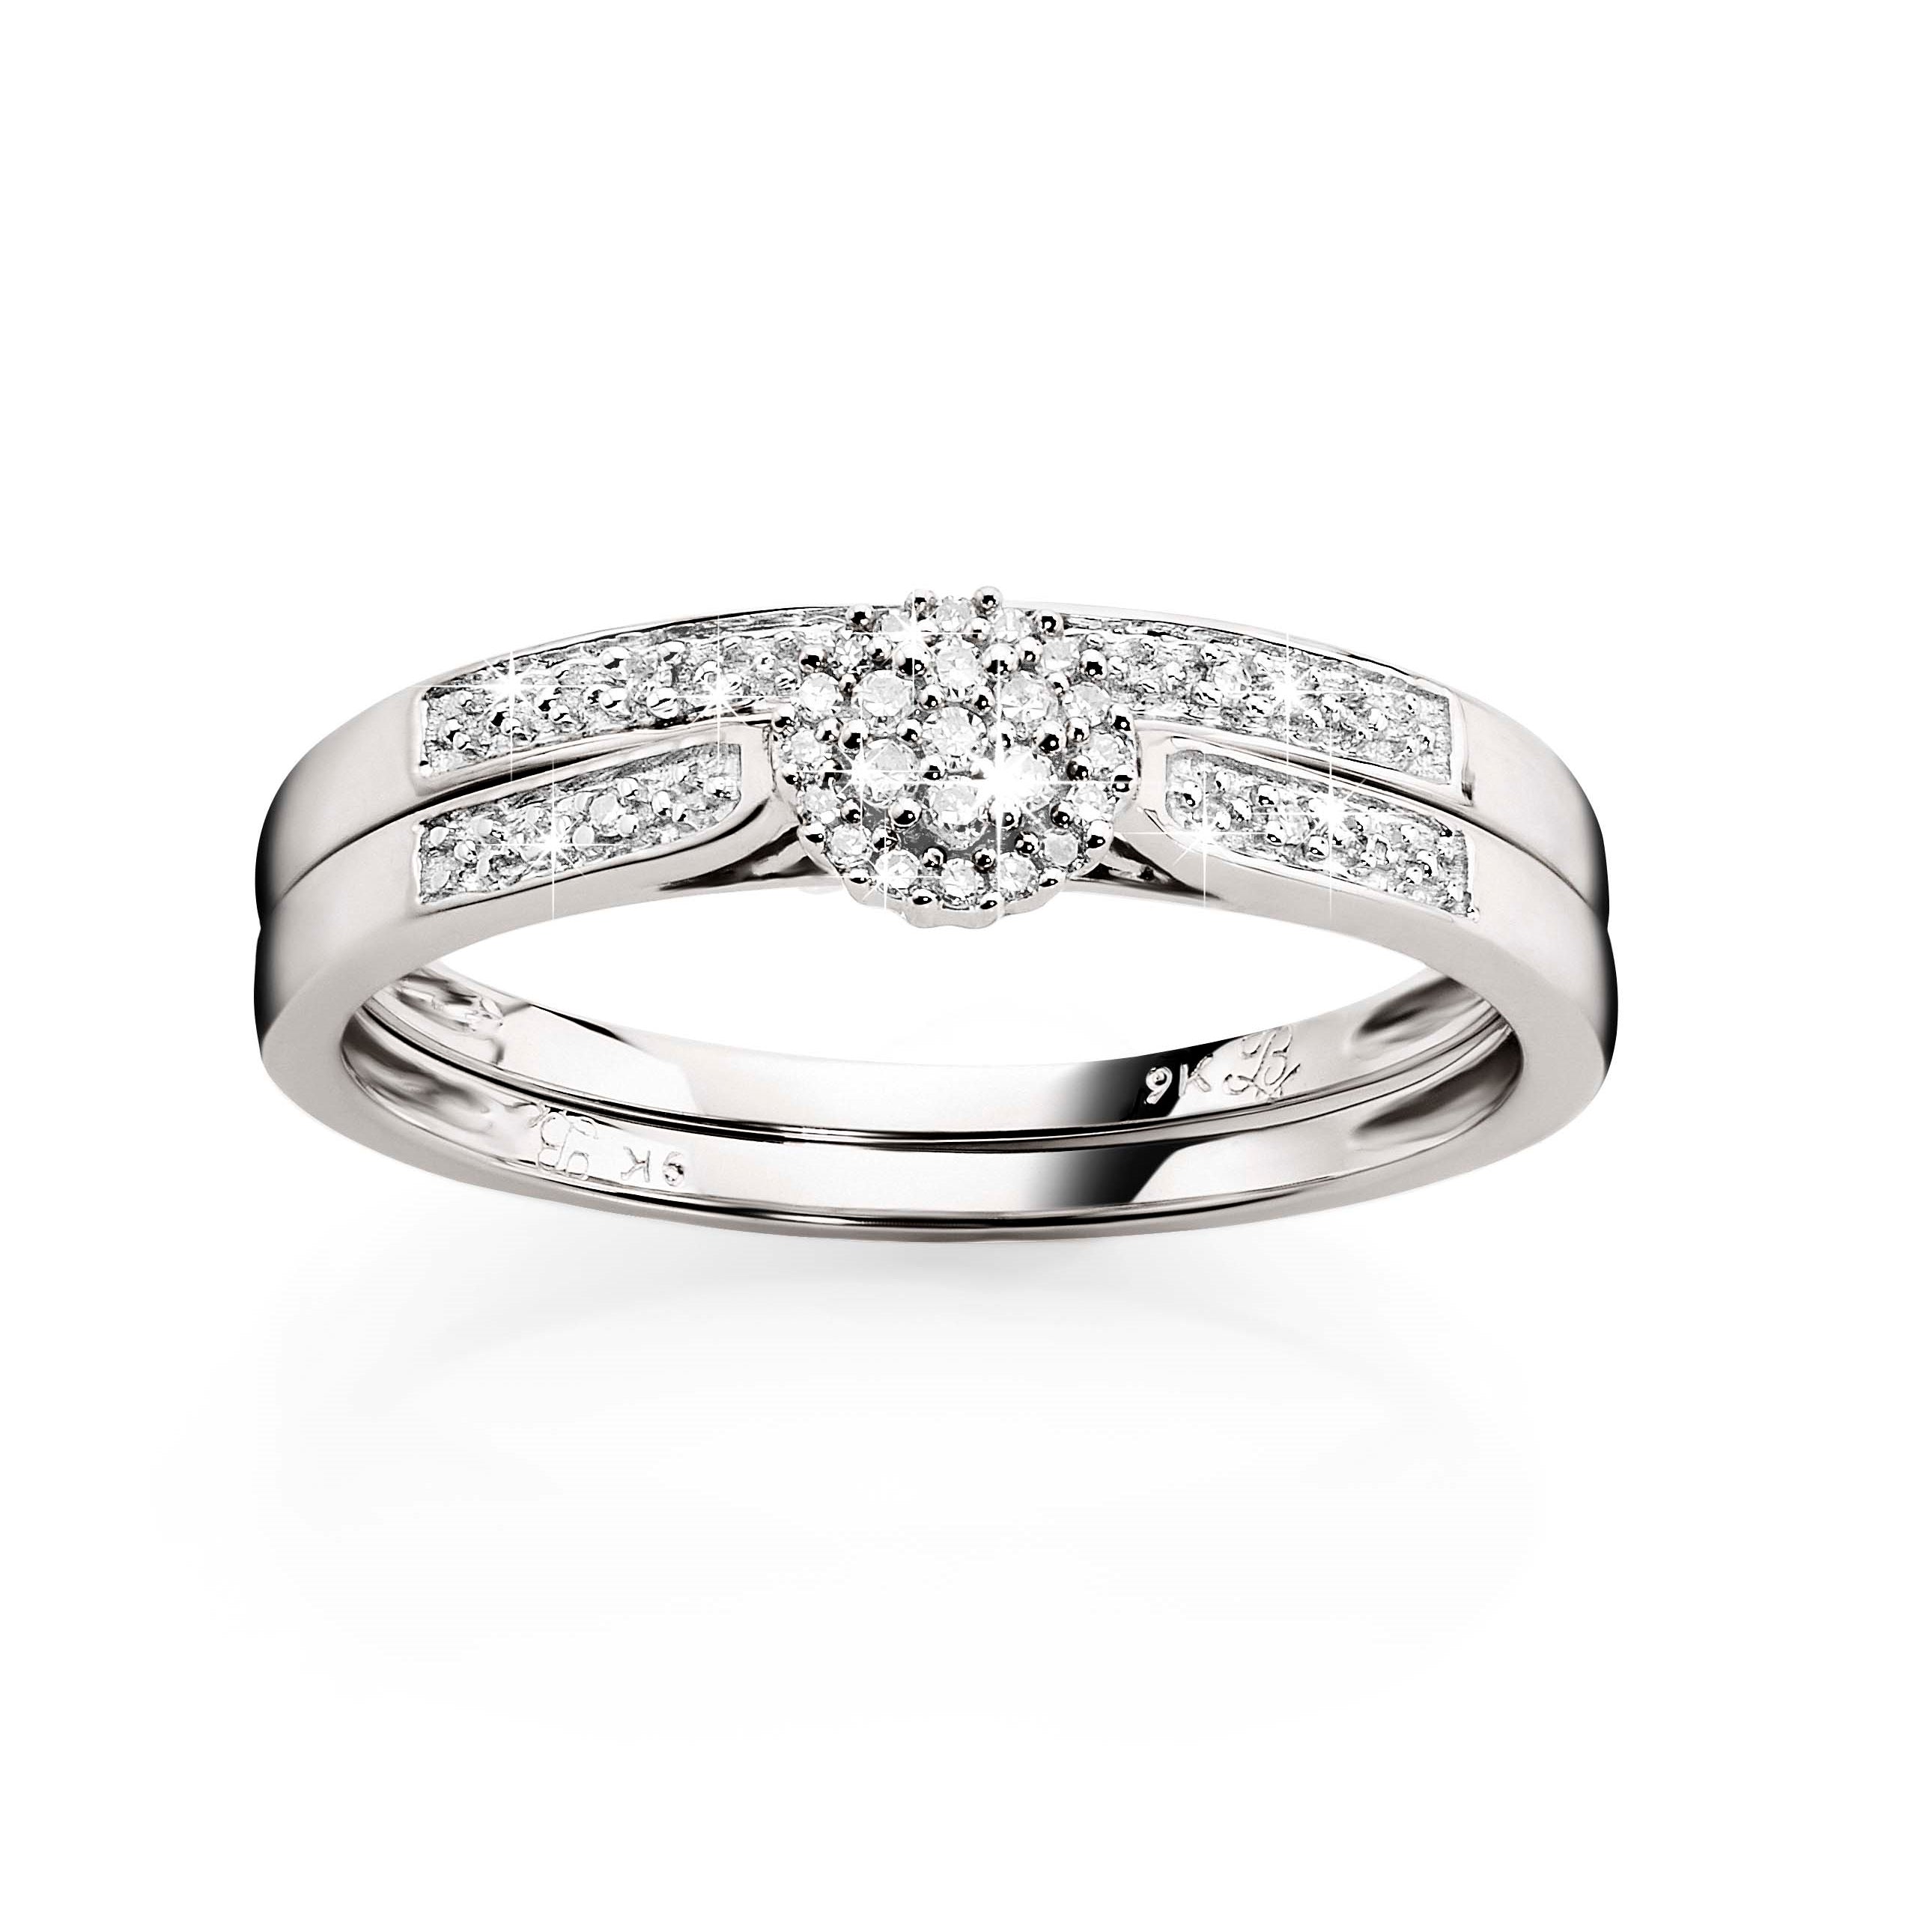 9ct white gold diamond ring with matching band